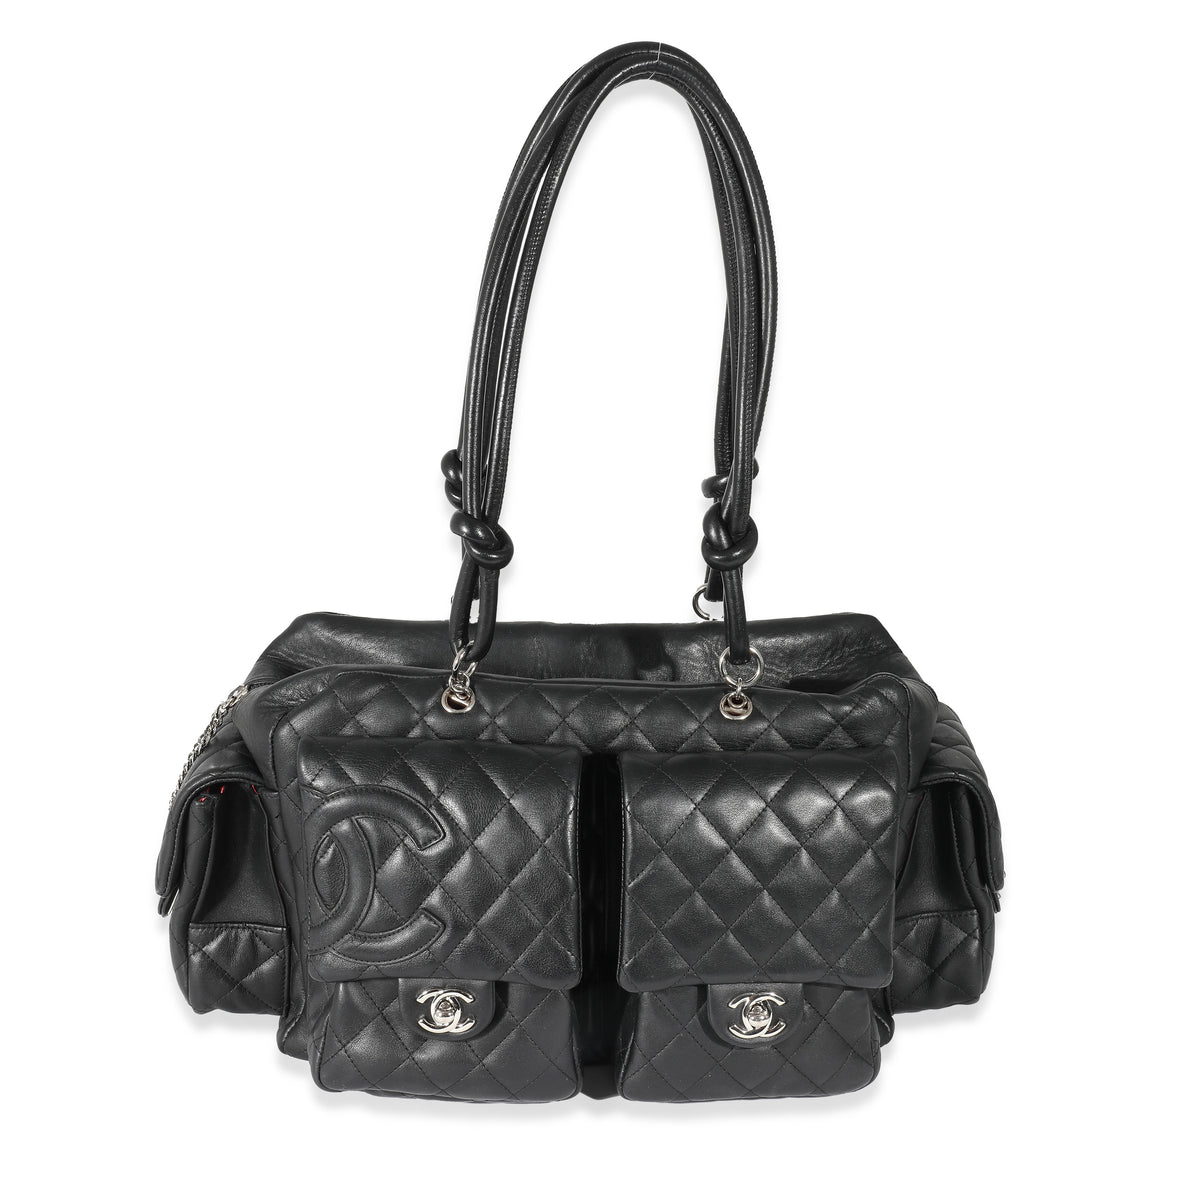 Get the best deals on CHANEL Cambon Tote Large Bags & Handbags for